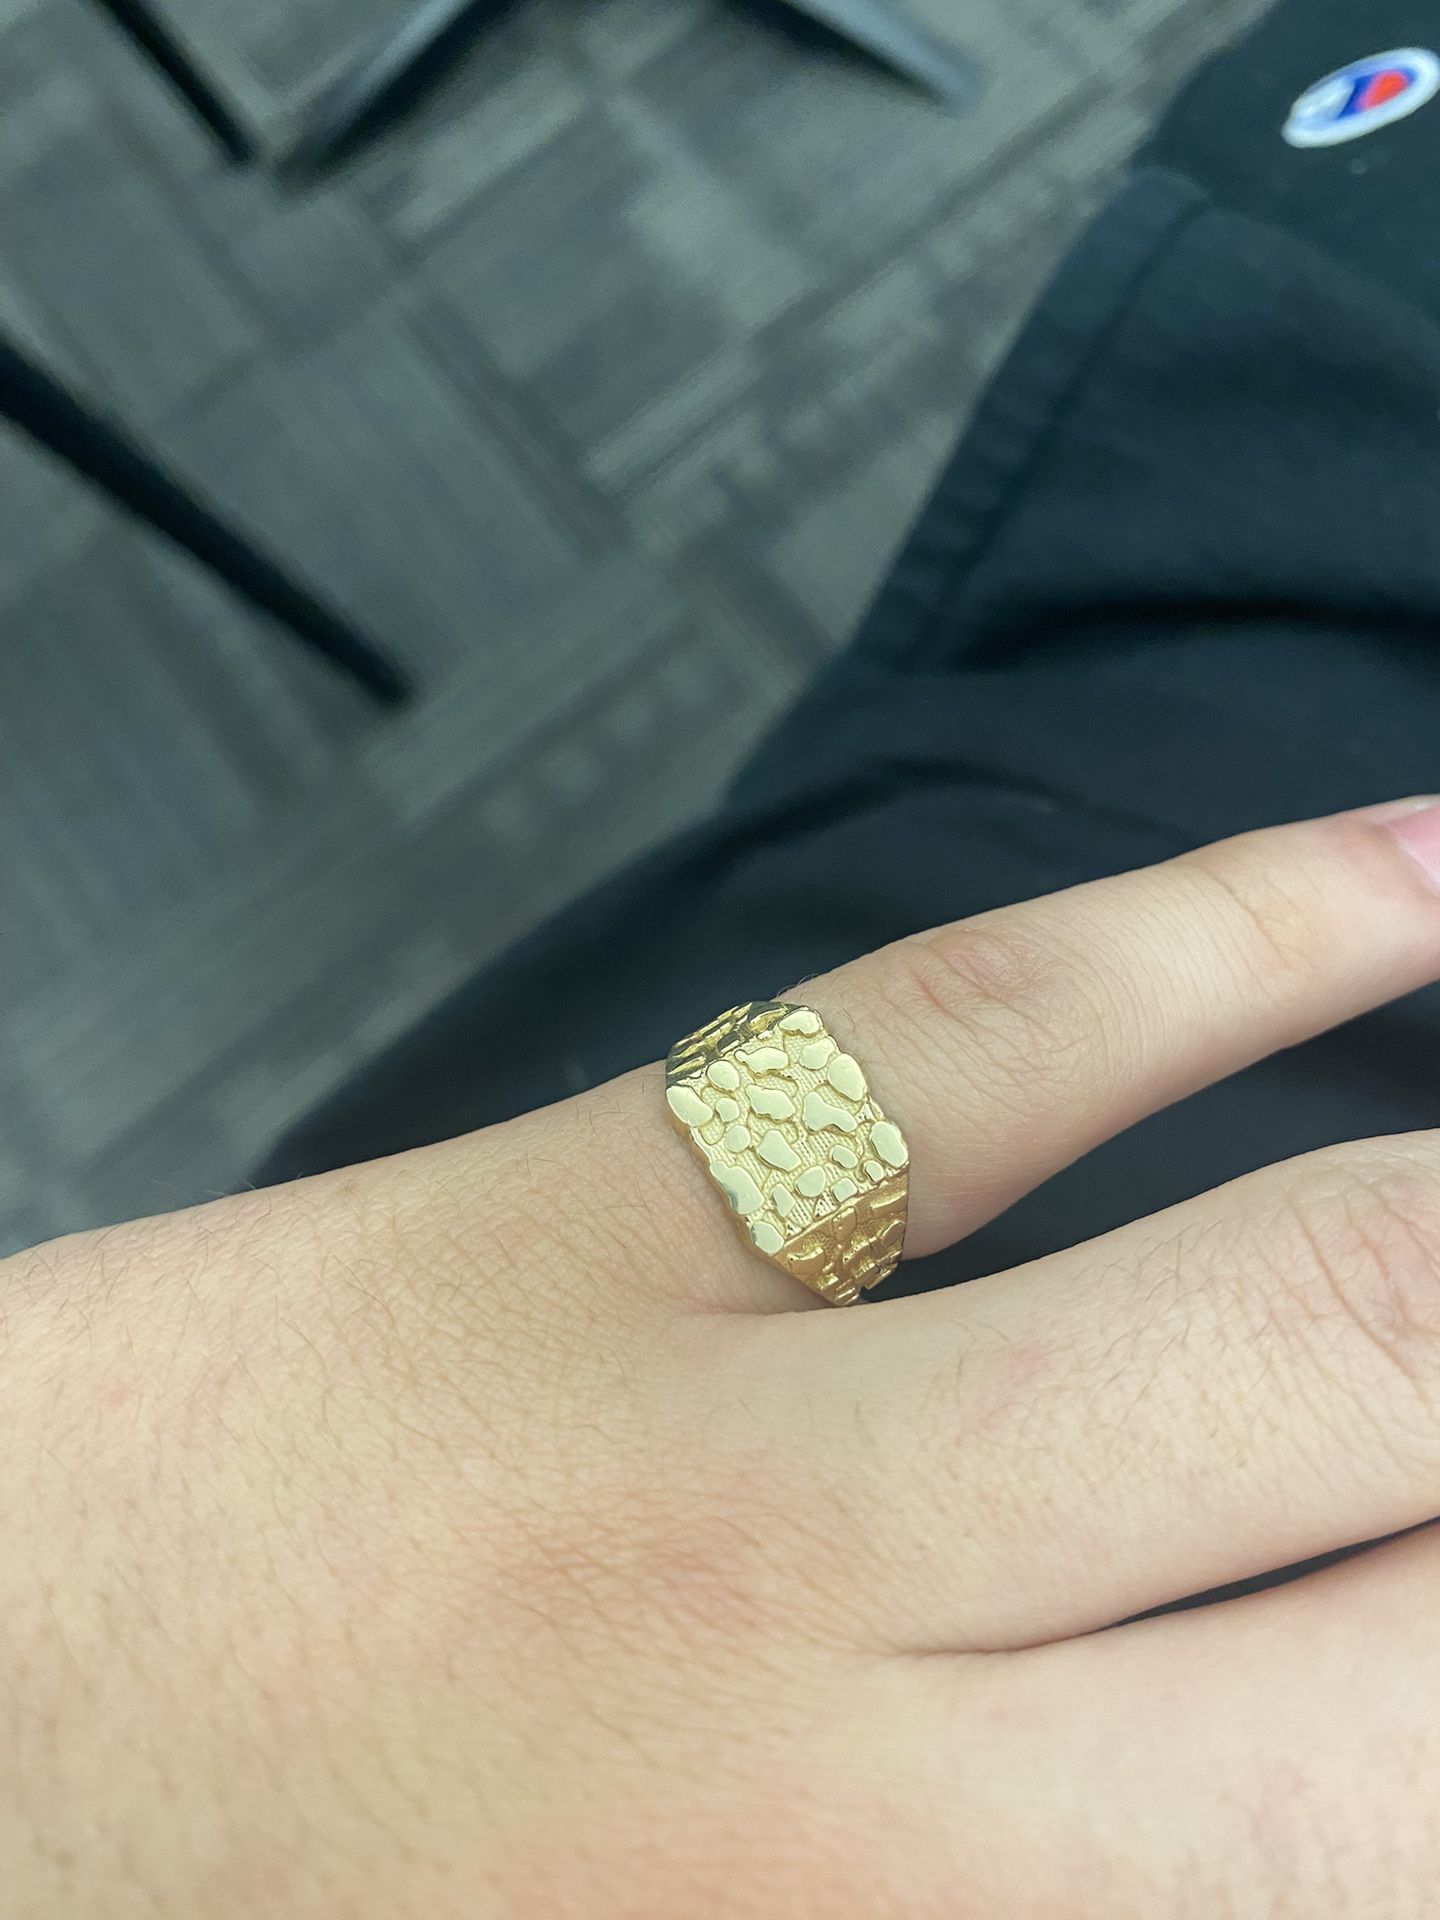 14k Nugget Ring Size 9